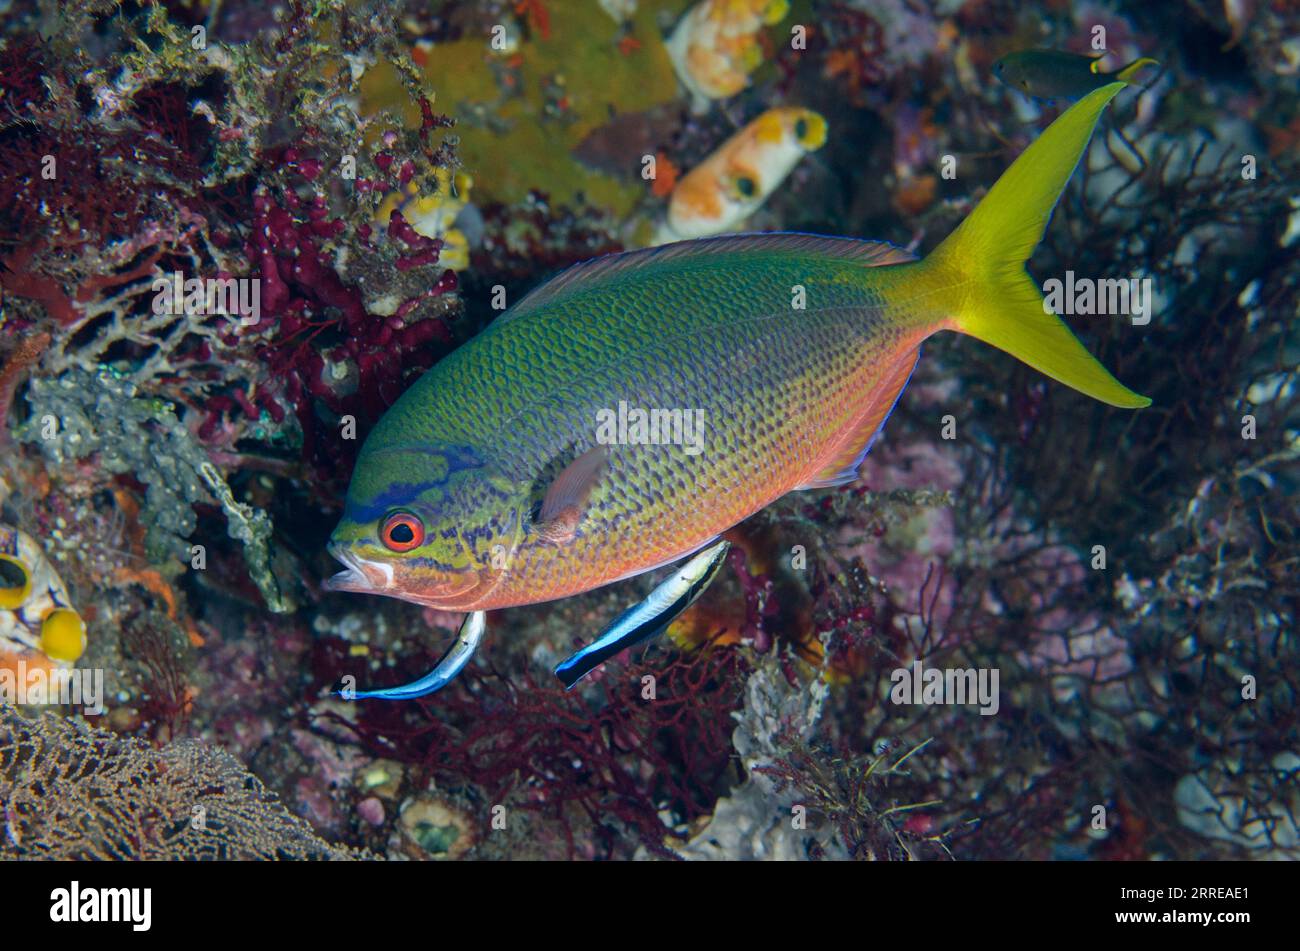 Yellowtail Fusilier, Caesio cuning, being cleaned by pair of Bluestreak Cleaner Wrasse, Labroides dimidiatus, Boo West dive site, Misool Island, Raja Stock Photo